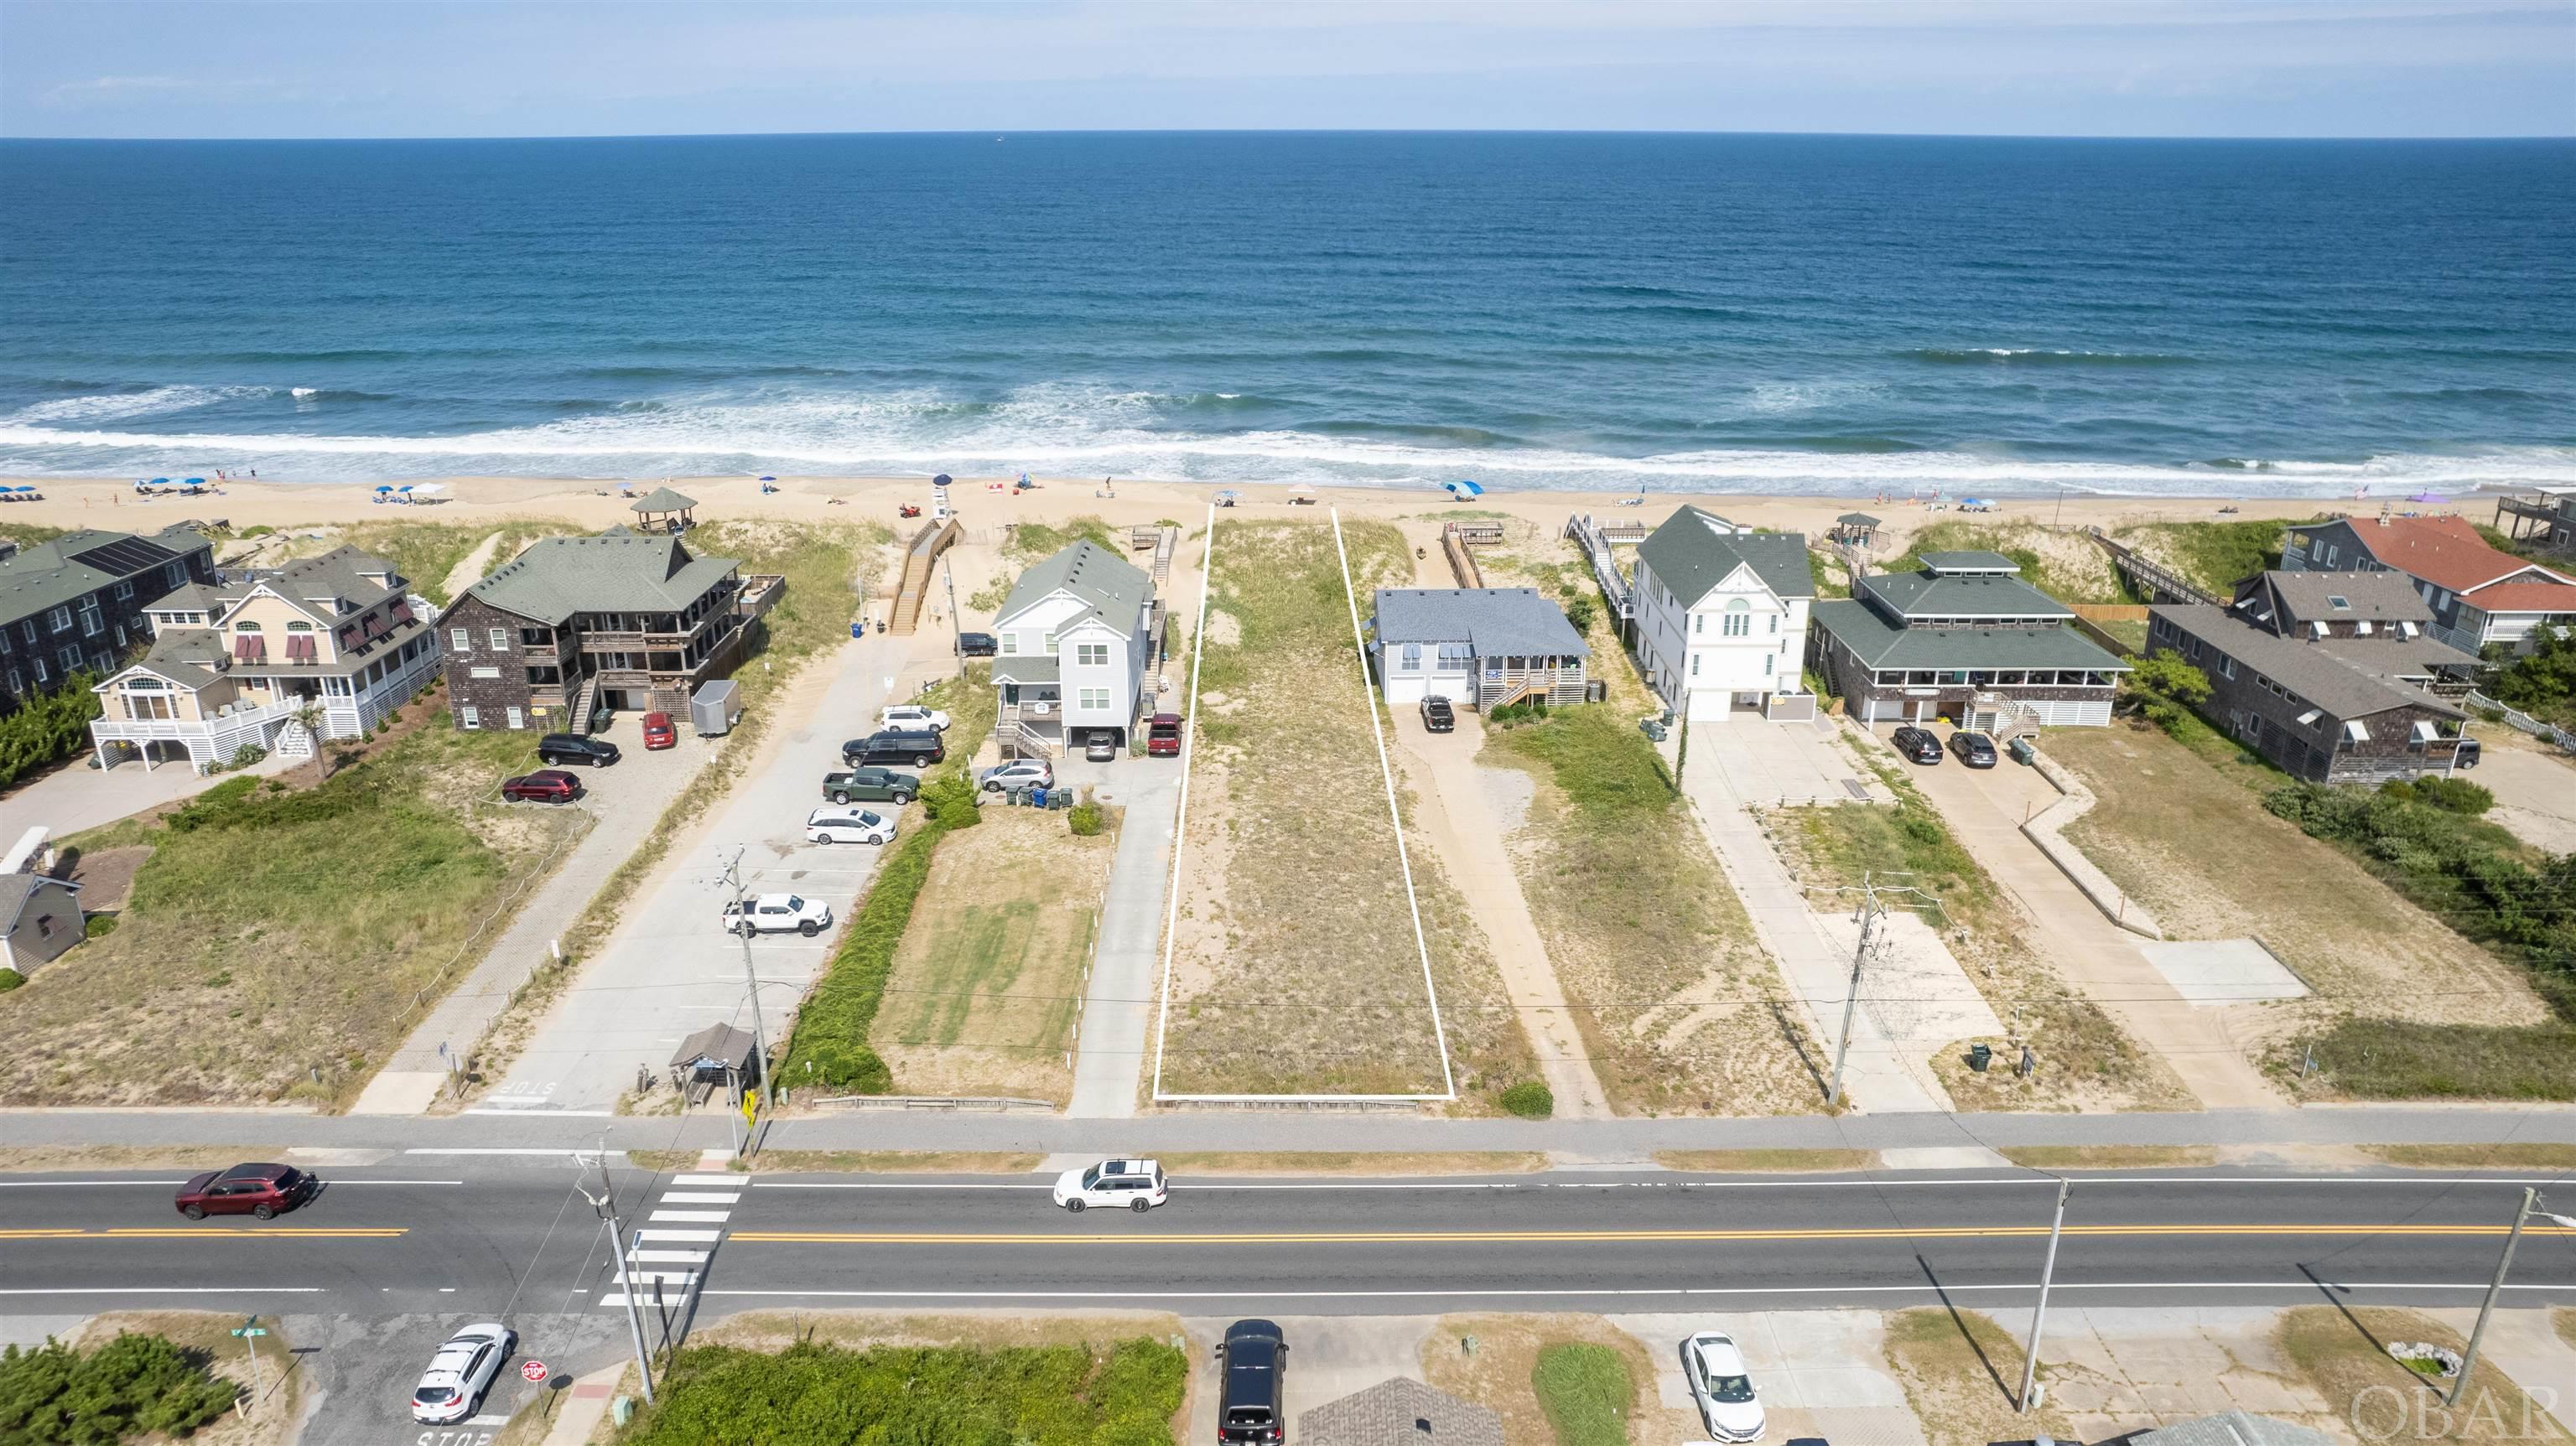 Rare opportunity: A 50' premium oceanfront lot in the heart of old Nags Head.  Deep lot is protected by large dunes covered with vegetation and a beautiful wide sandy beach.  This is currently the only active oceanfront listing in Nags Head.  The lot is identified as Lot 155R (previously identified as Lots 50 and 150).  Encroachment from small portion of existing structure and driveway of the southern border of the lot are identified on the recent survey, which is available to a prospective buyer upon request.